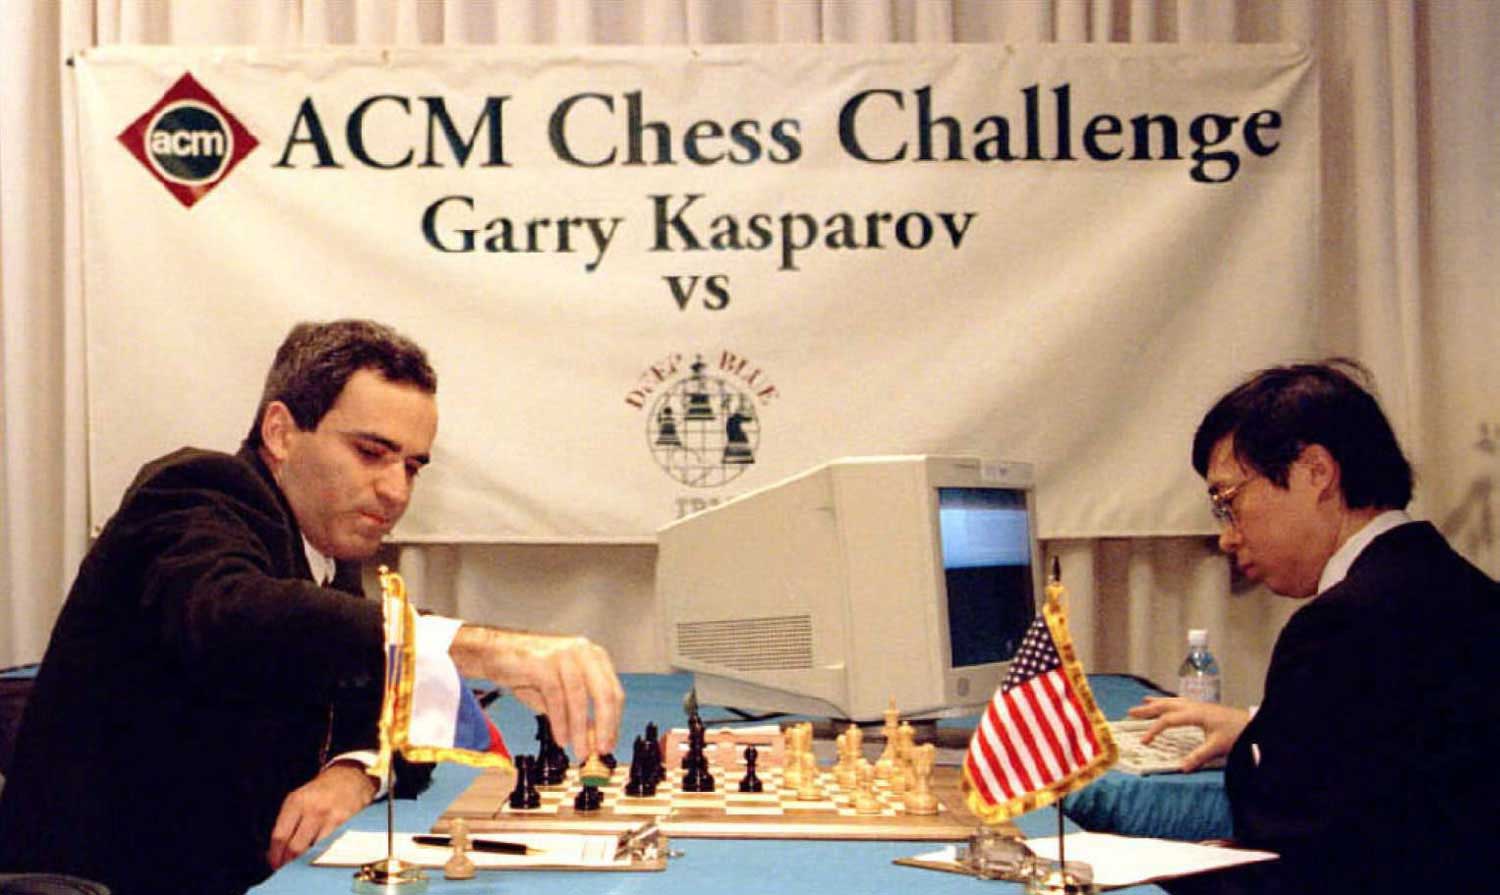 A man moves a piece on a chess board as another man watches and types into a computer.